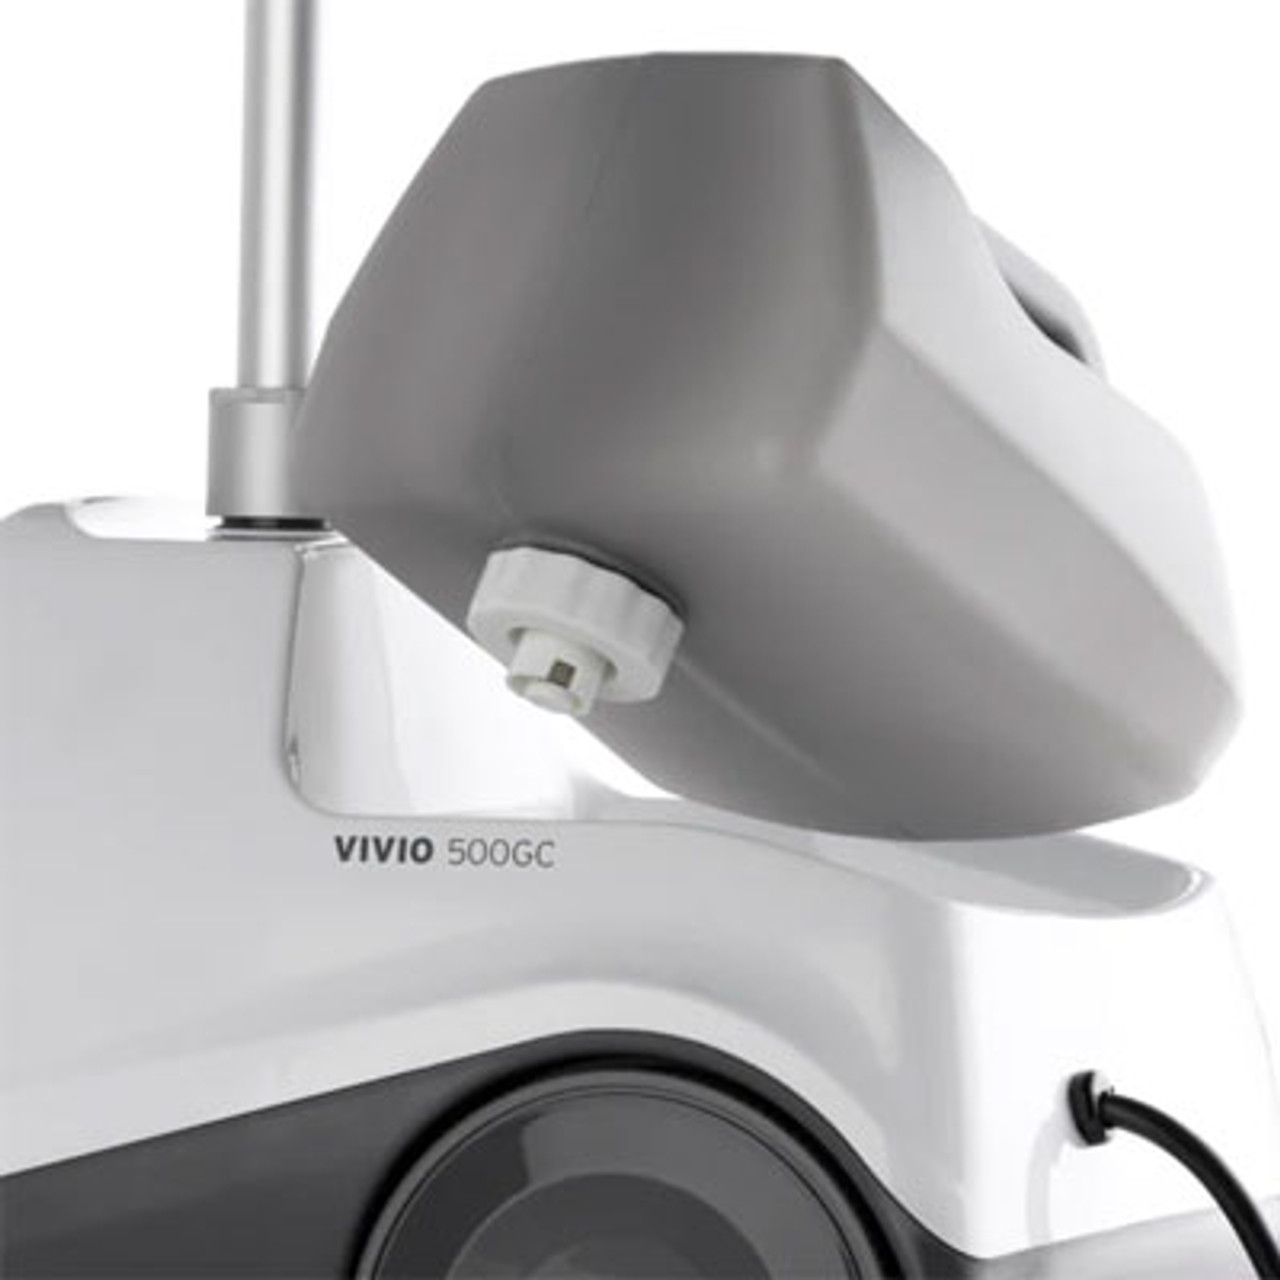 Reliable Vivio 500GC Professional Garment Steamer With Brush - Qualifies for Free Shipping!